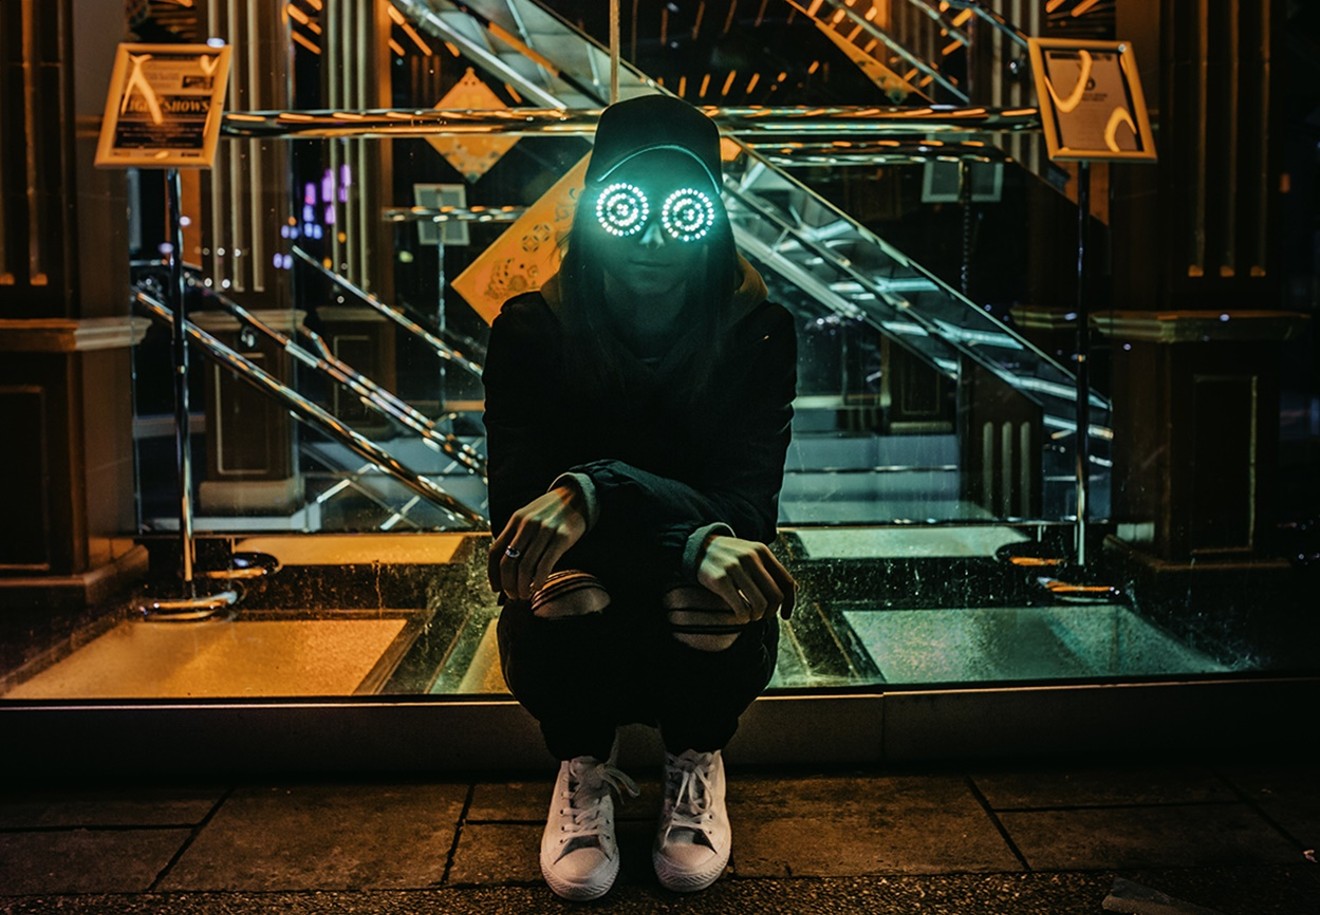 Rezz is scheduled to perform on Friday, March 8, at Rawhide Event Center in Chandler.